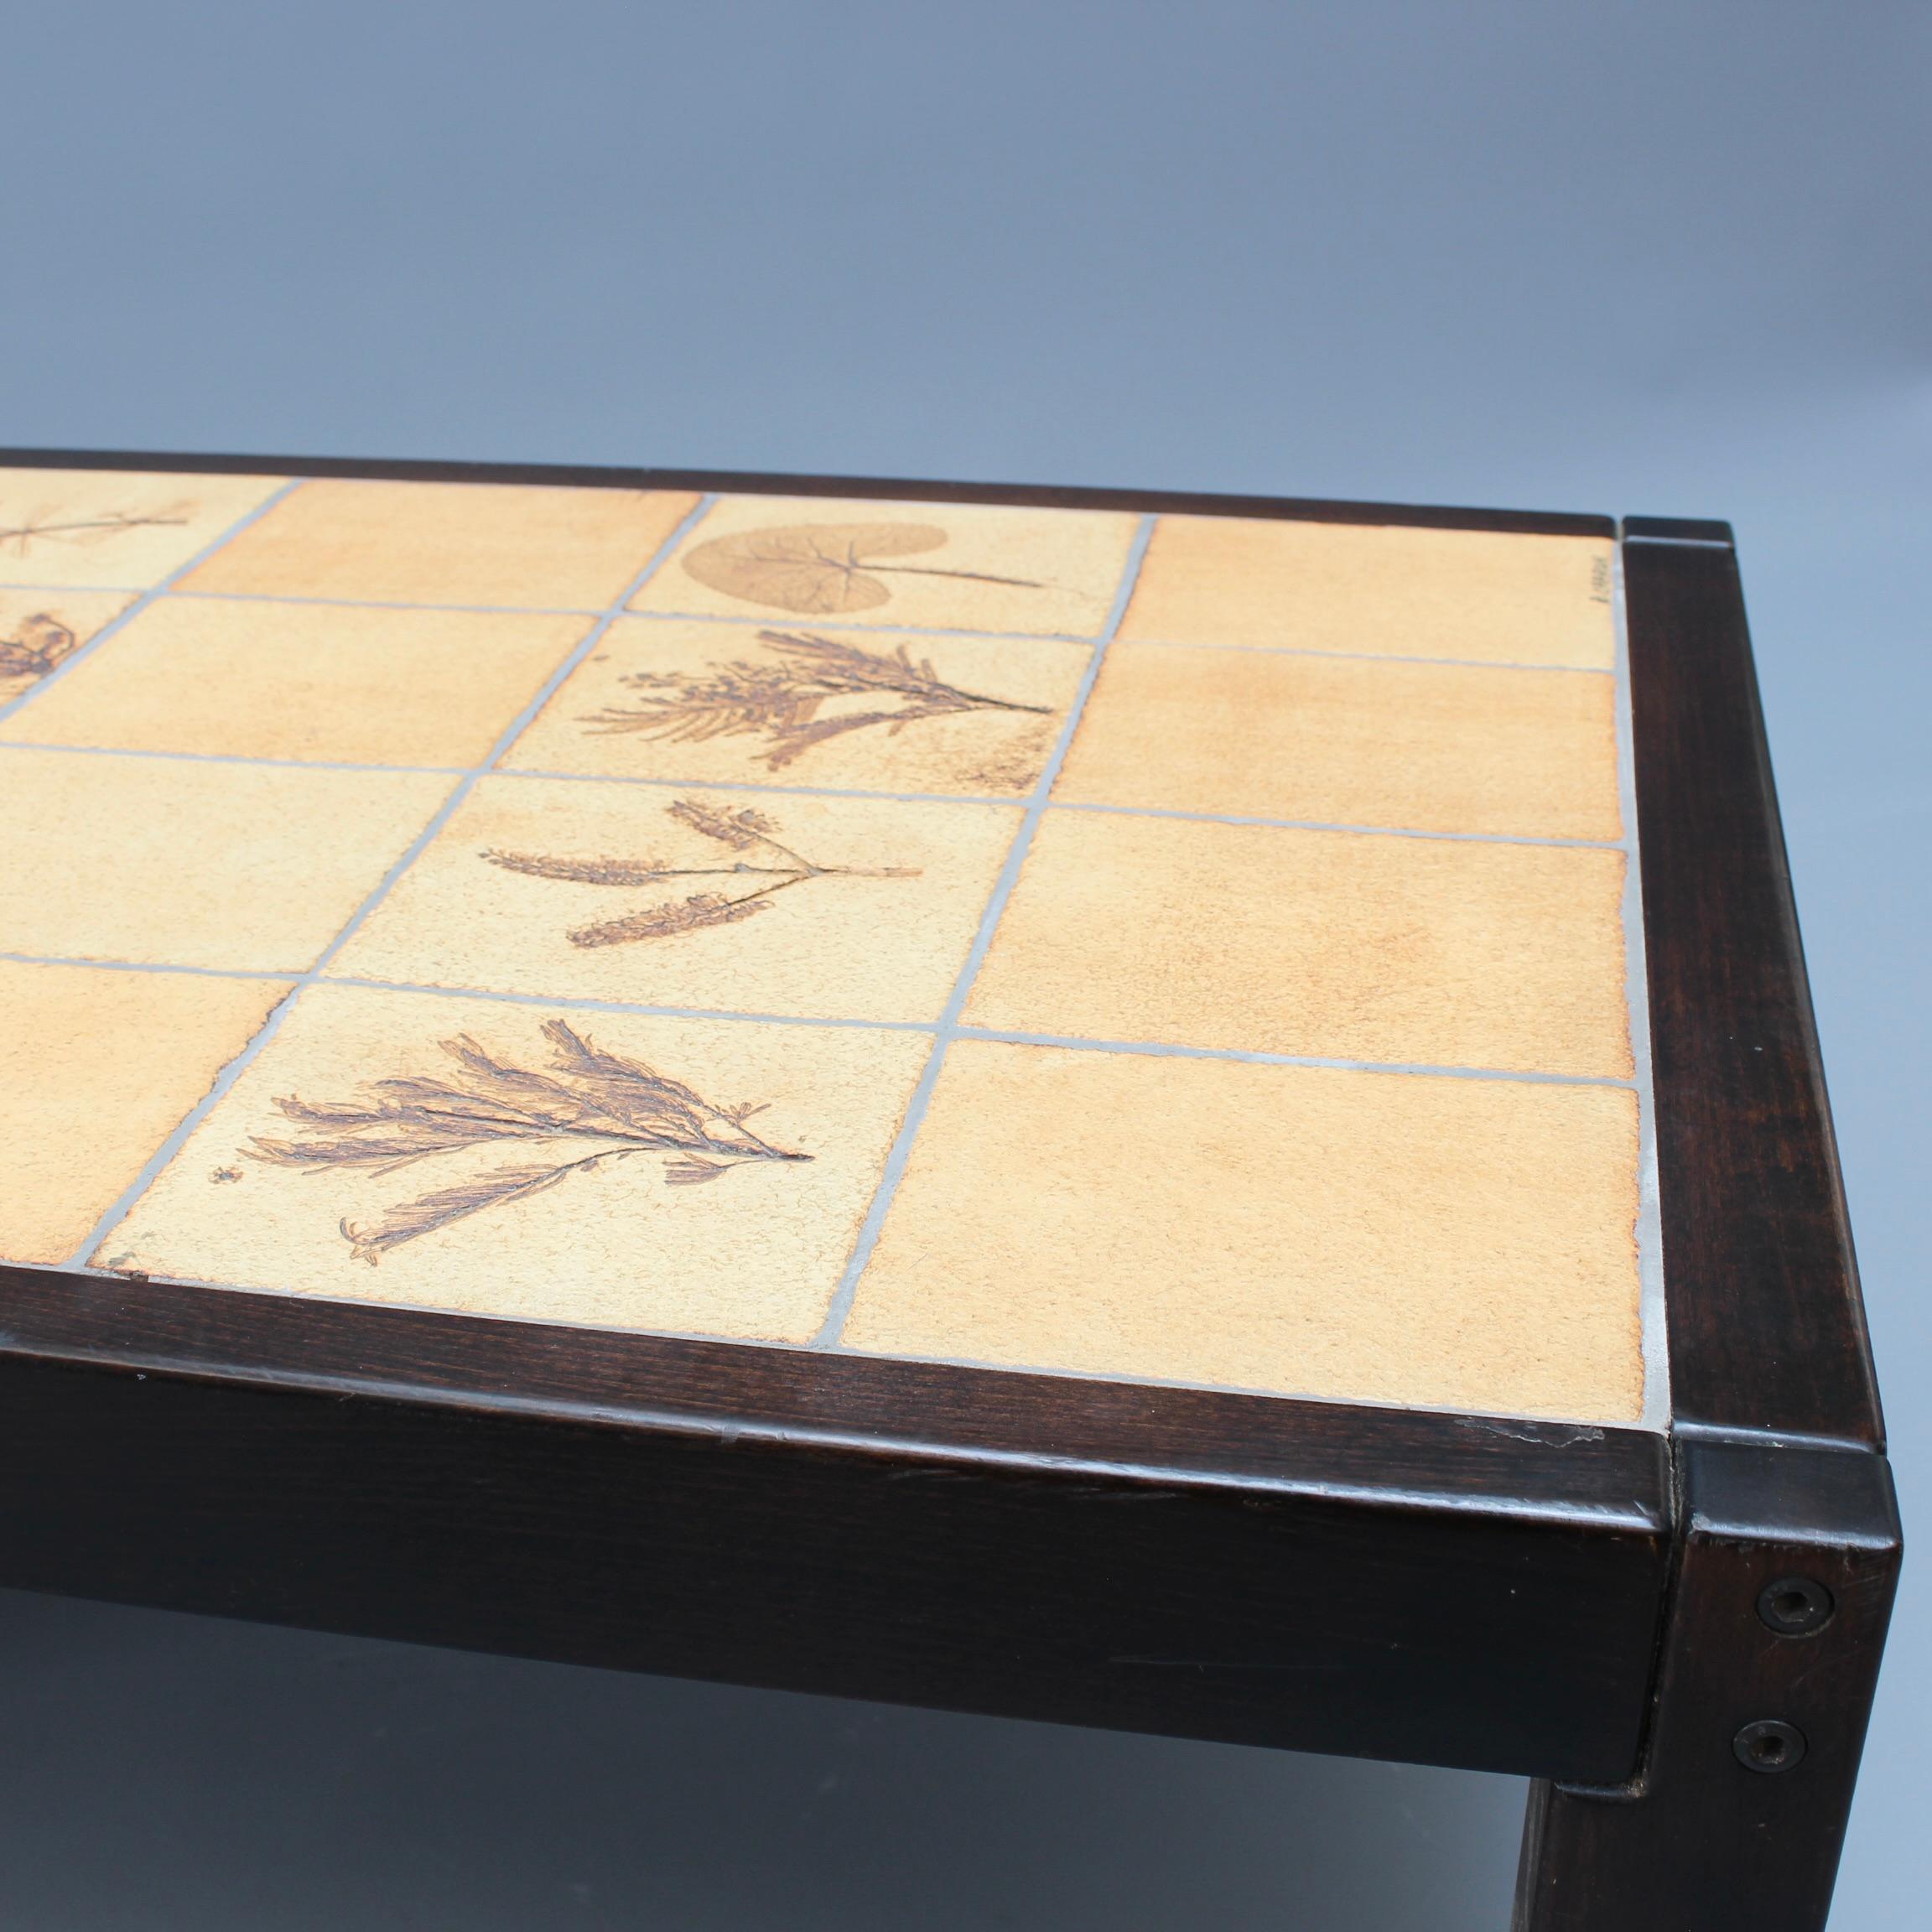 Vintage French Coffee Table with Leaf Motif Tiles by Roger Capron (circa 1970s) For Sale 12